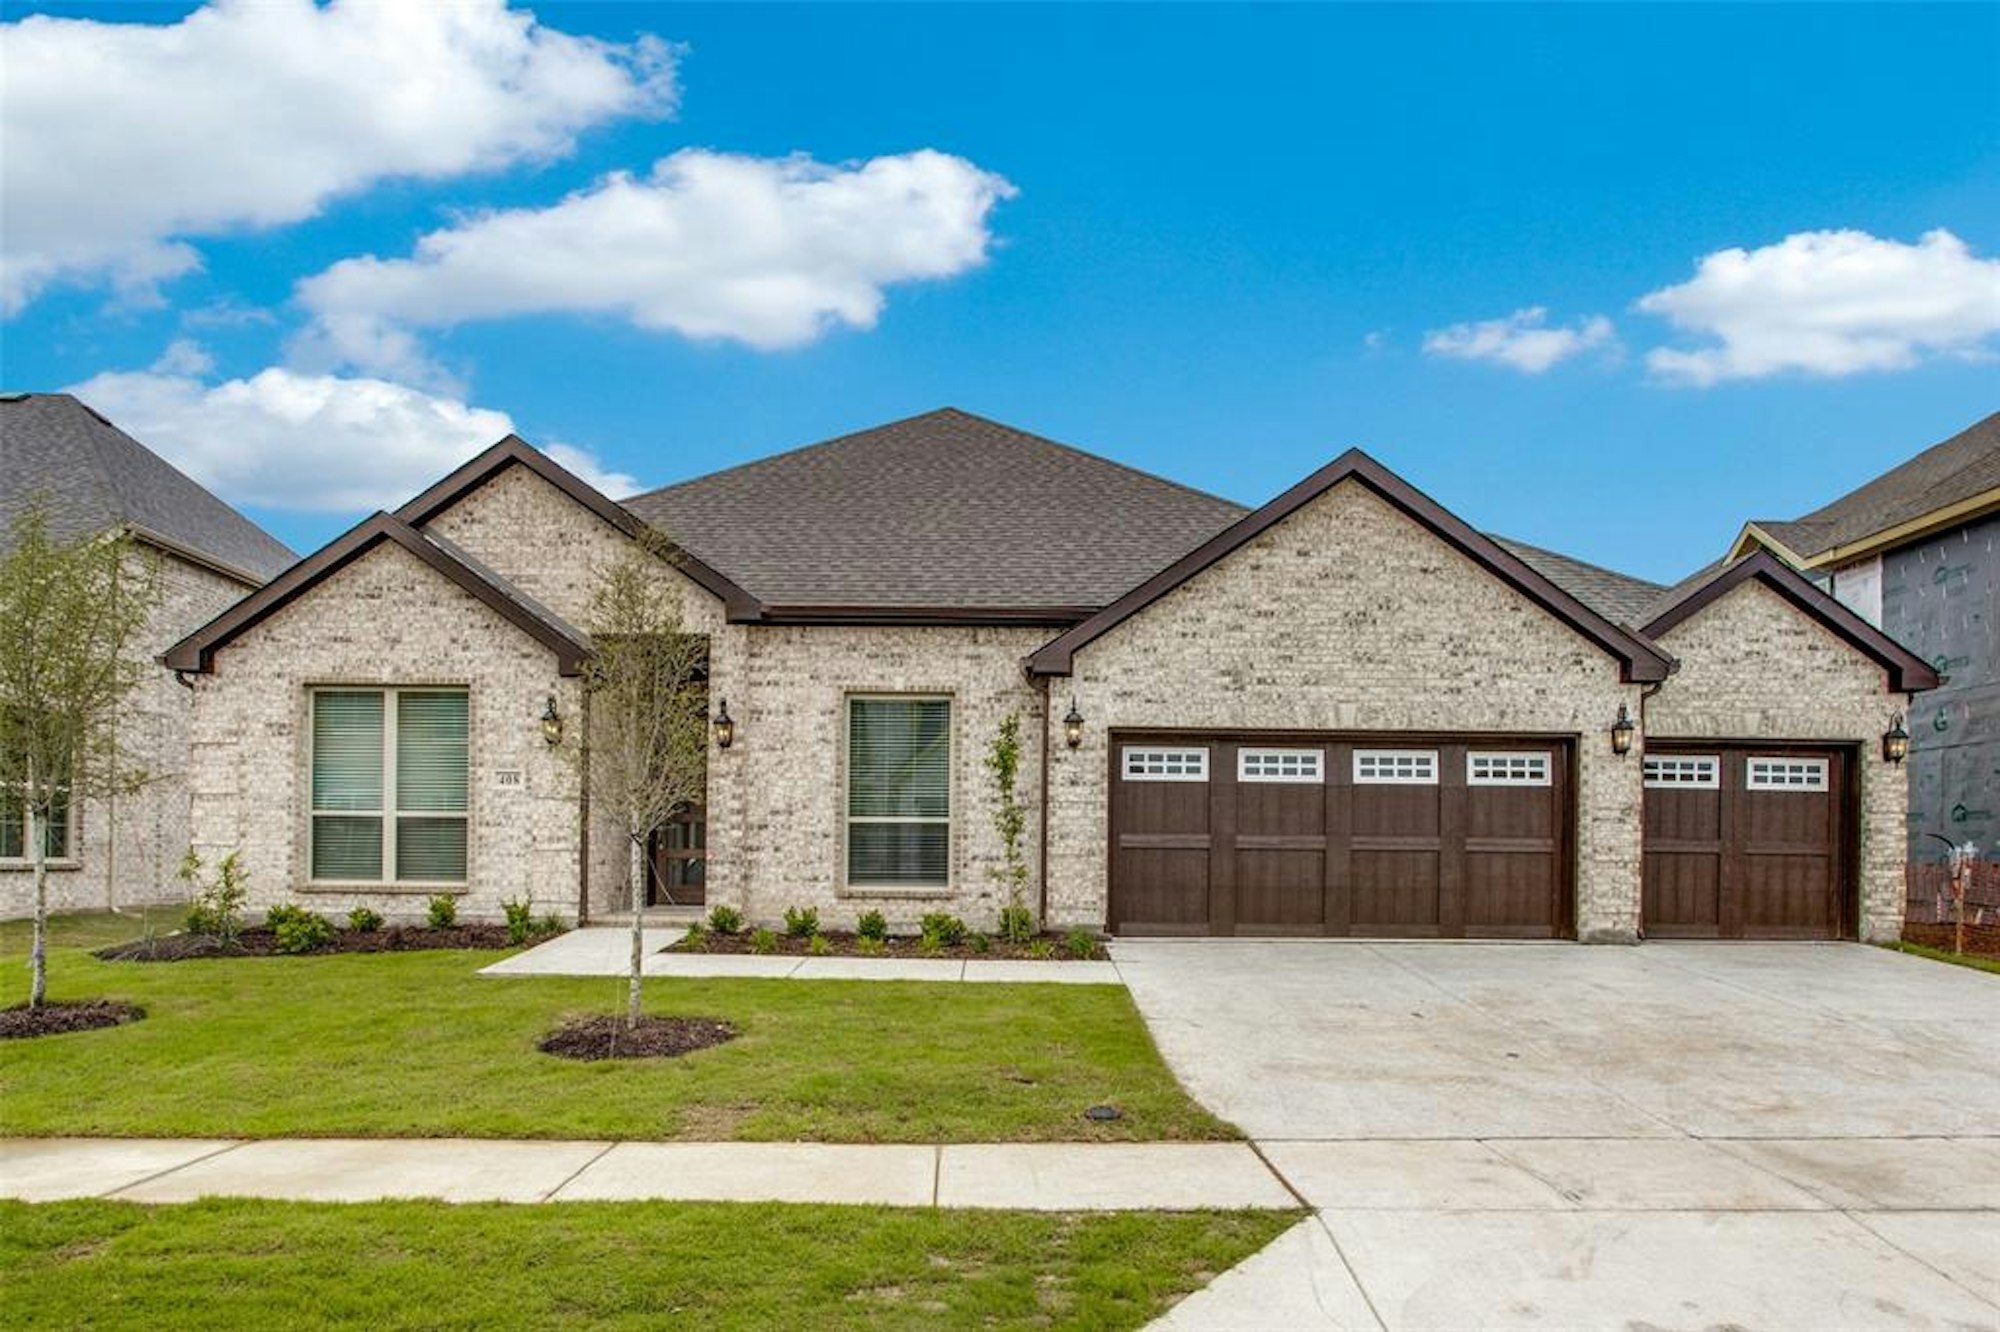 Photo 1 of 25 - 408 Lake Forest Trl, Anna, TX 75409